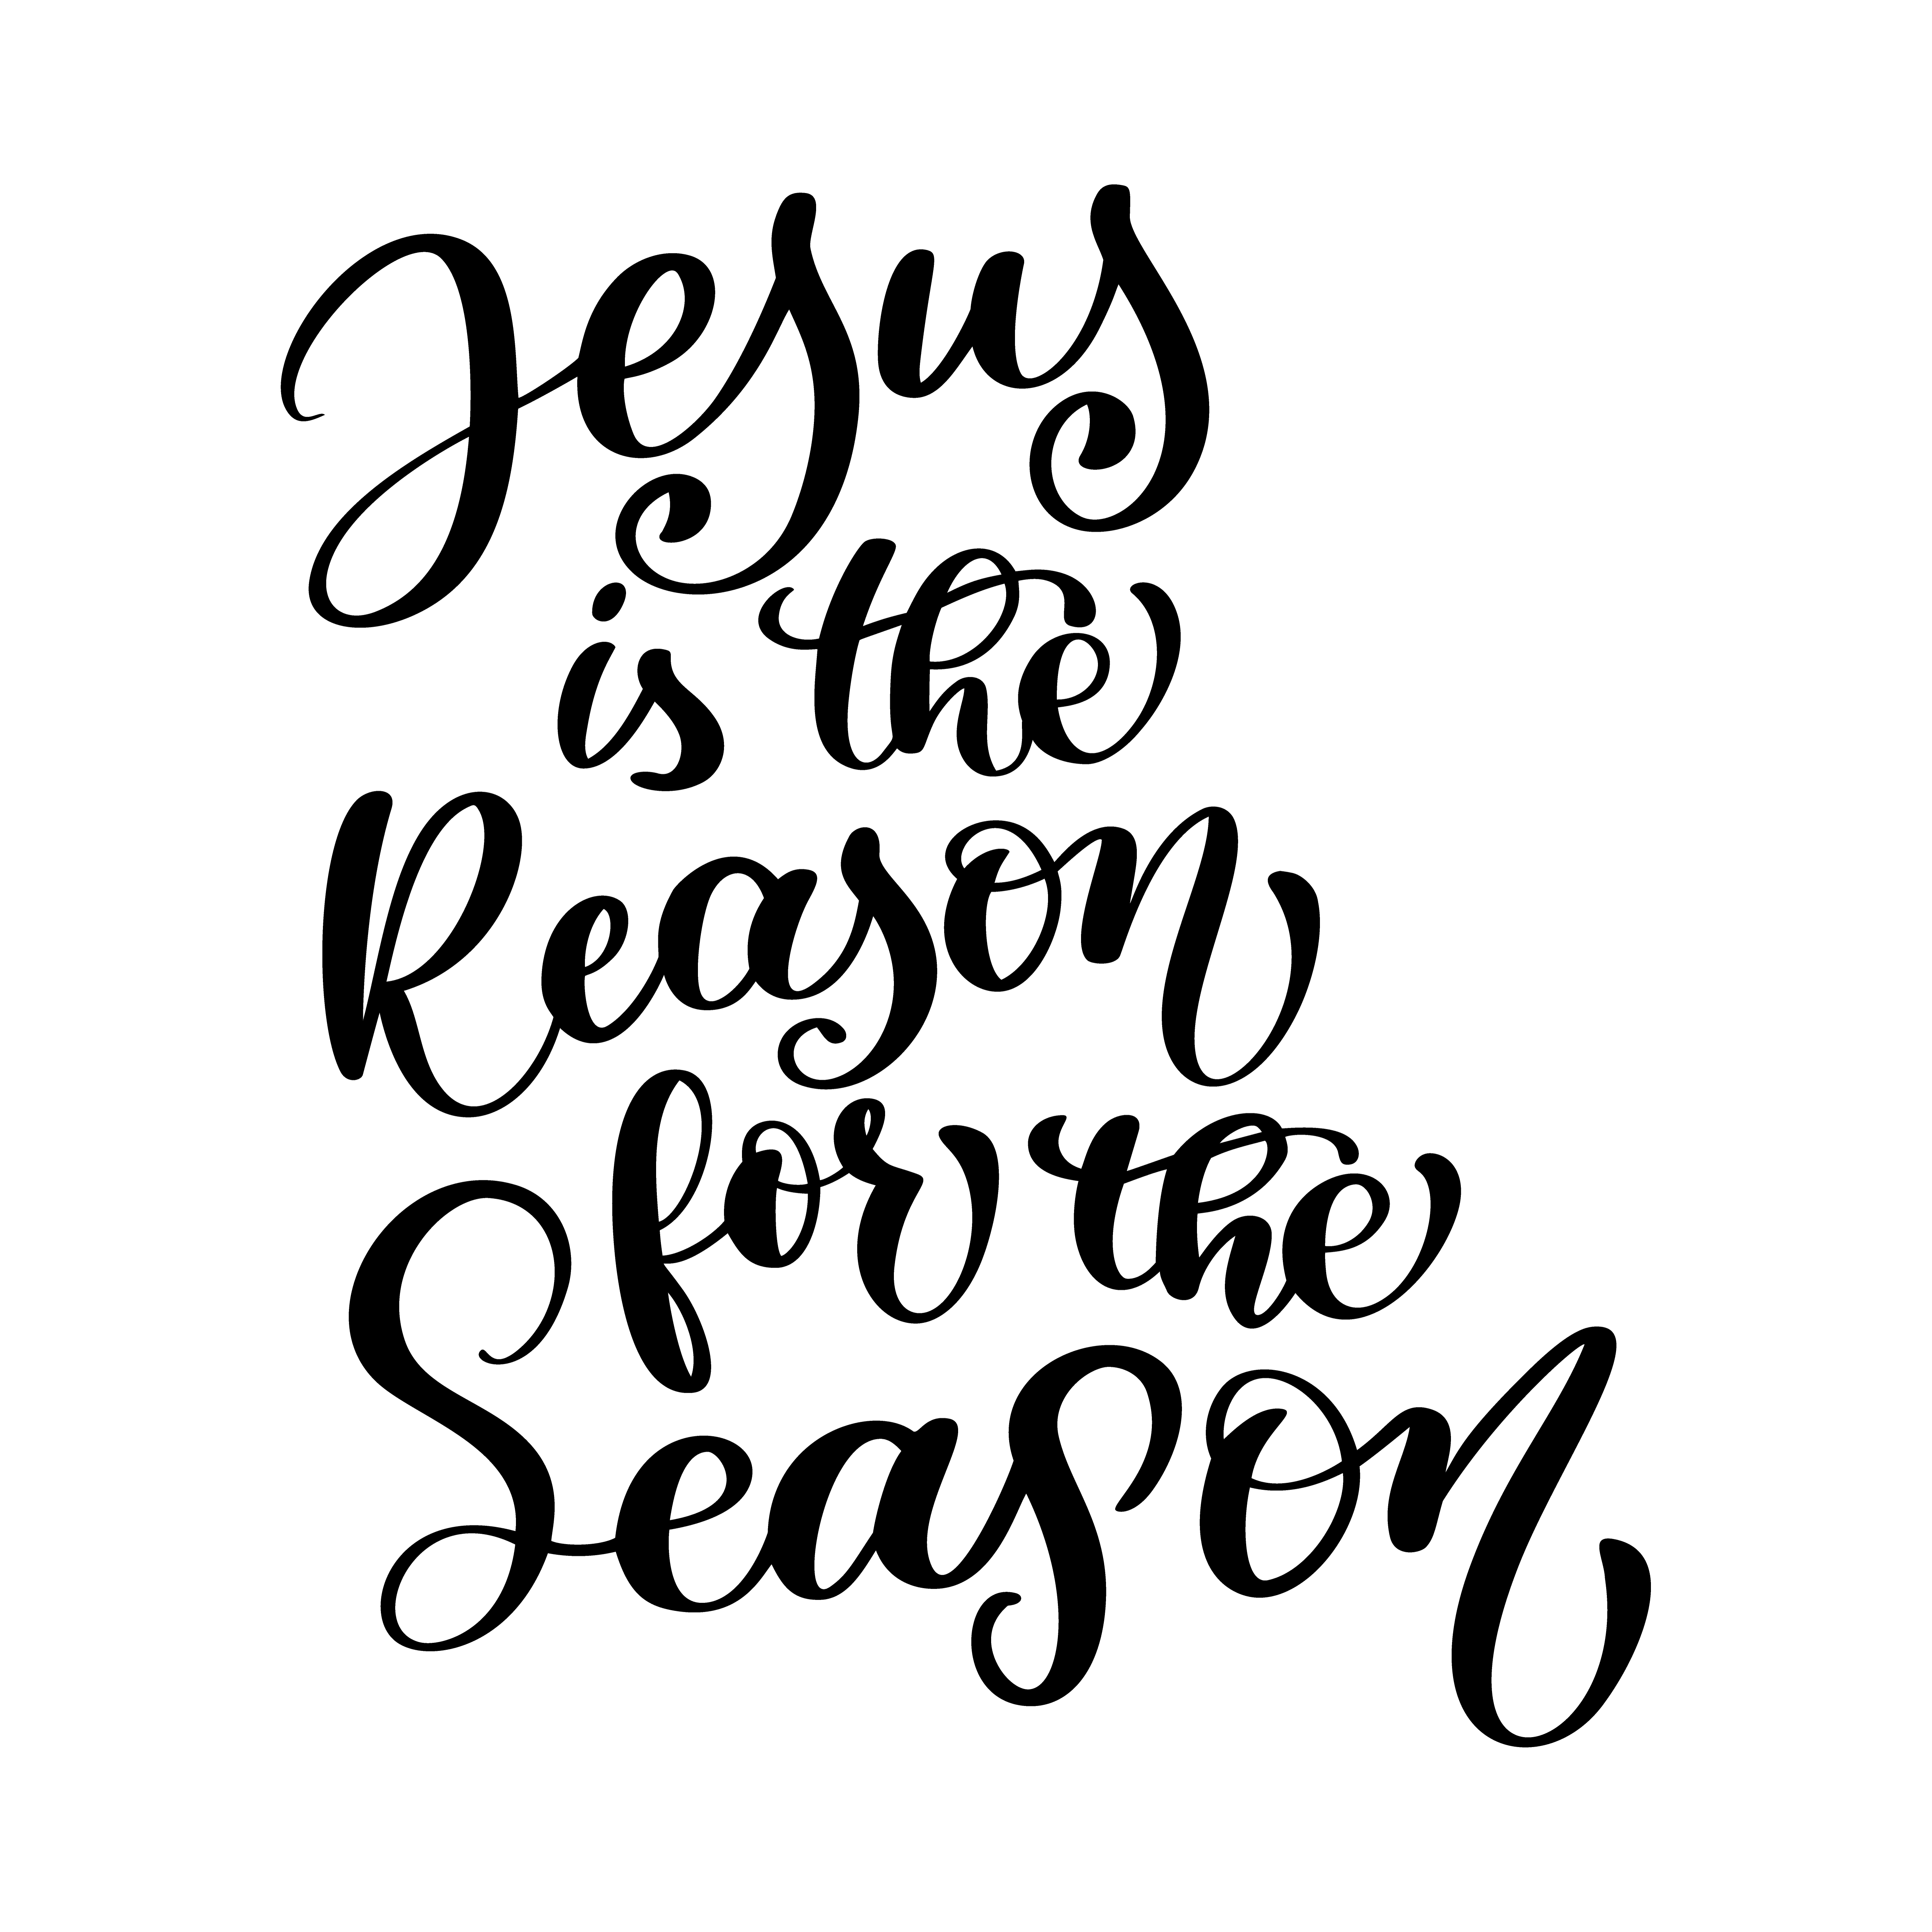 Jesus is the Reason for the Season christian quote in Bible.